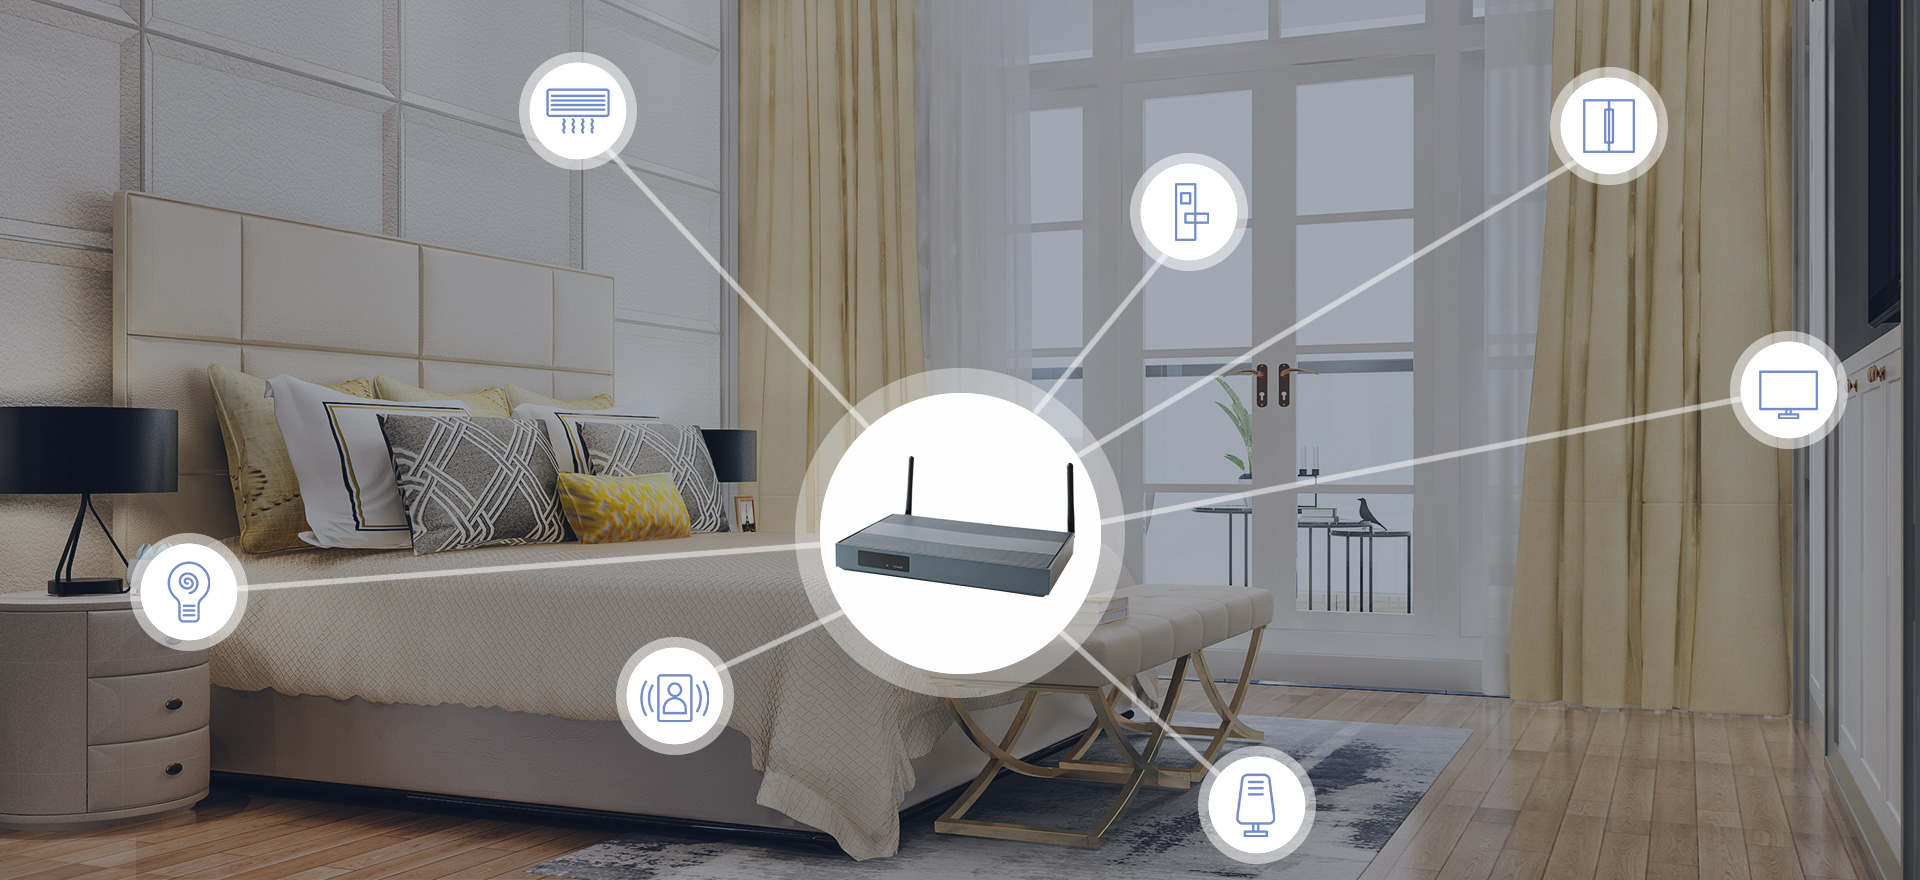 Videostrong Smart Home IoT Devices Control